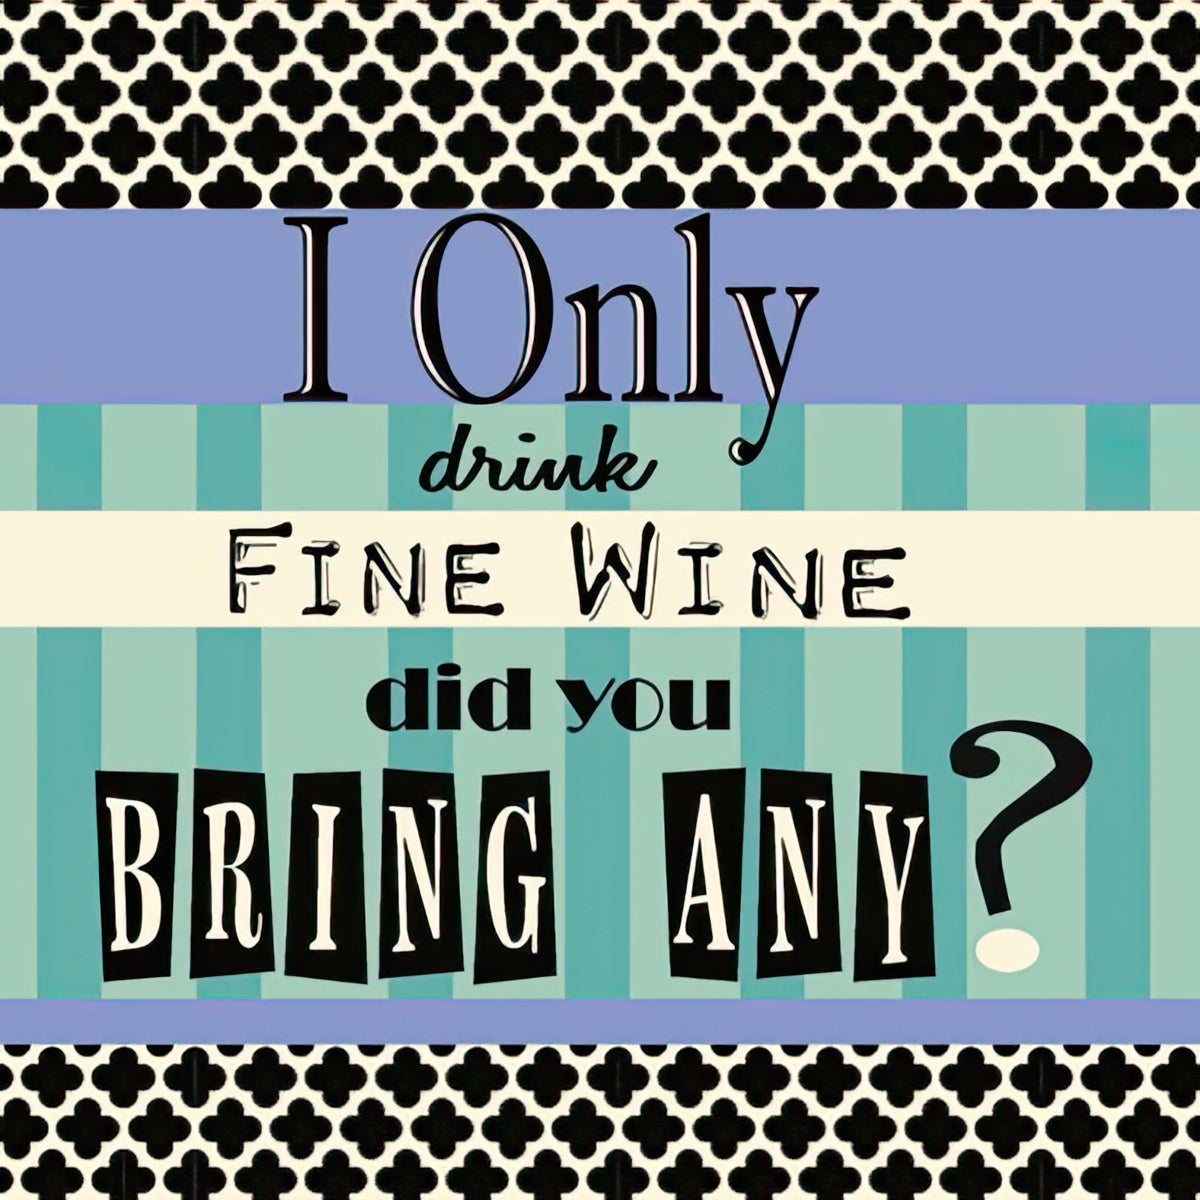 I only drink fine wine Did you bring any?